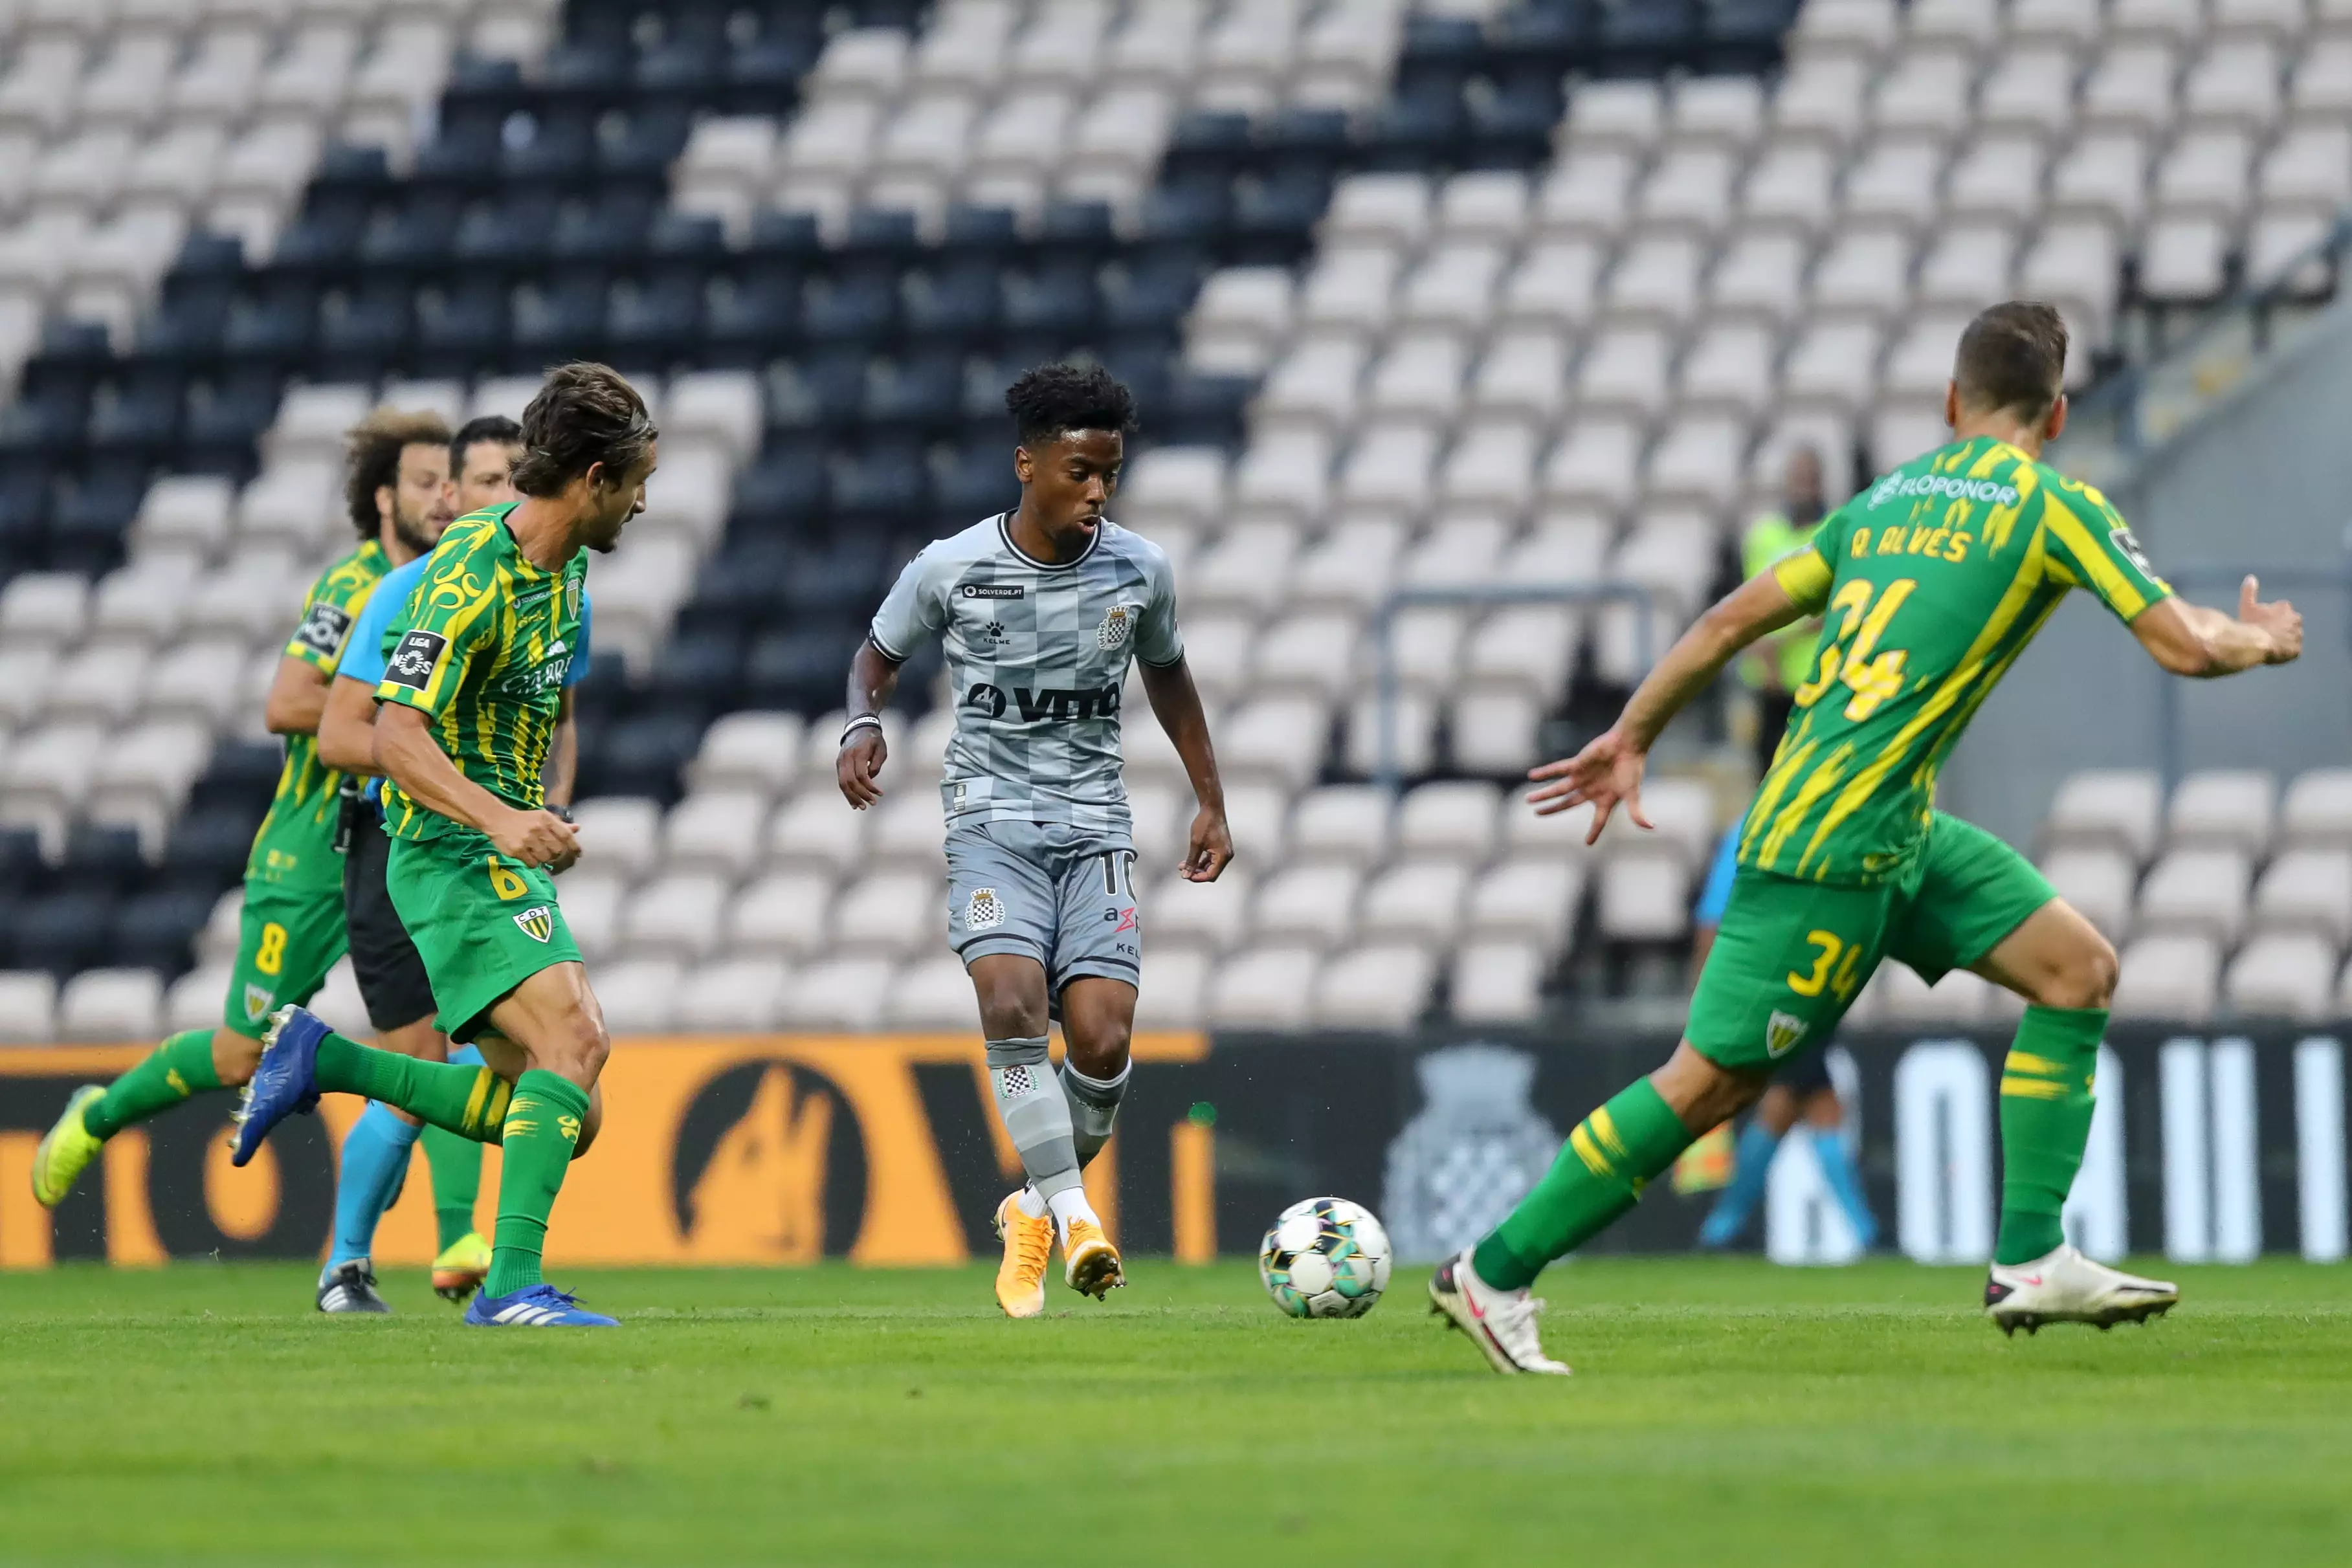 Gomes playing for Boavista on loan. Image: PA Images